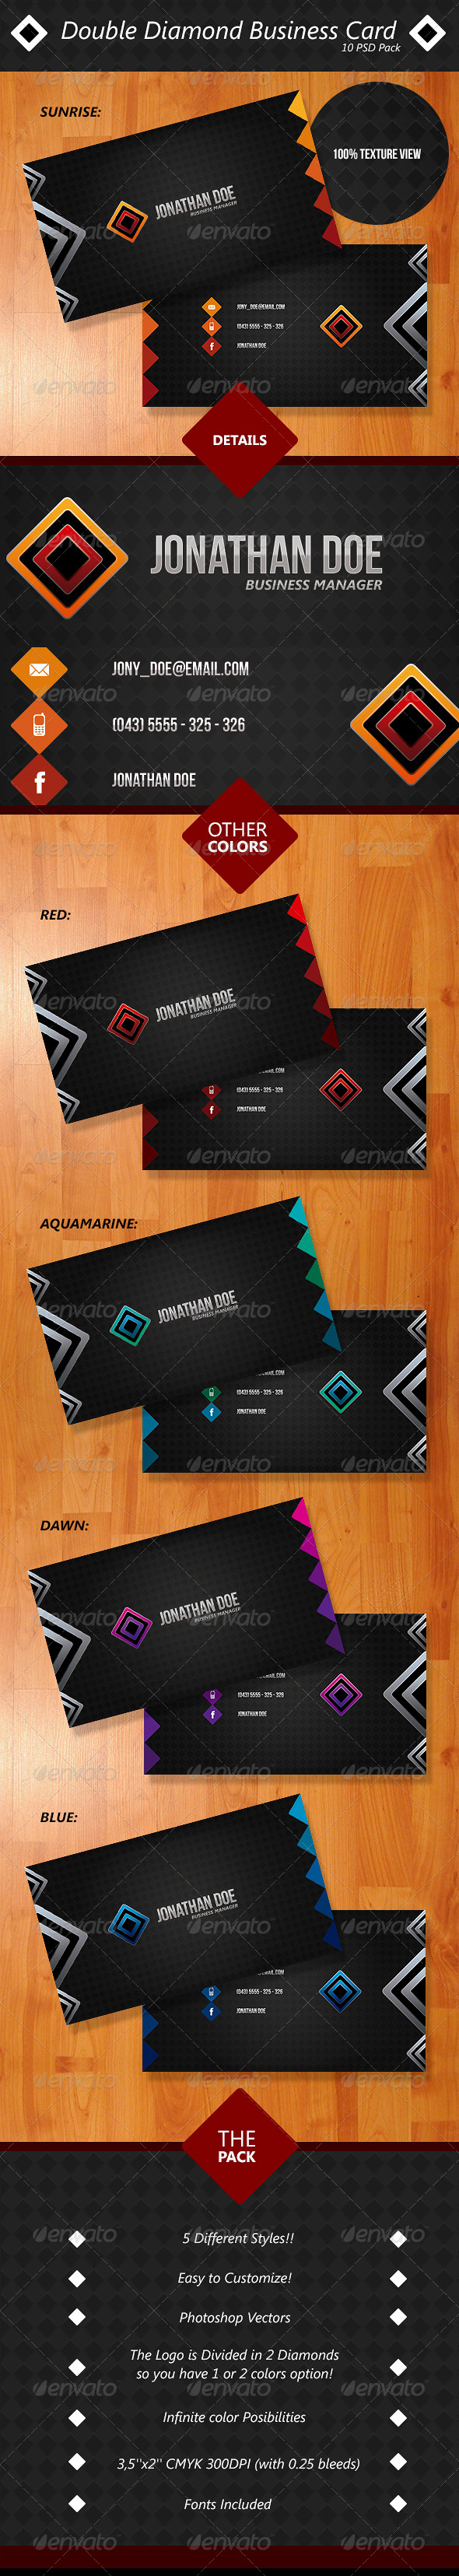 Double Diamond Business Card Pack